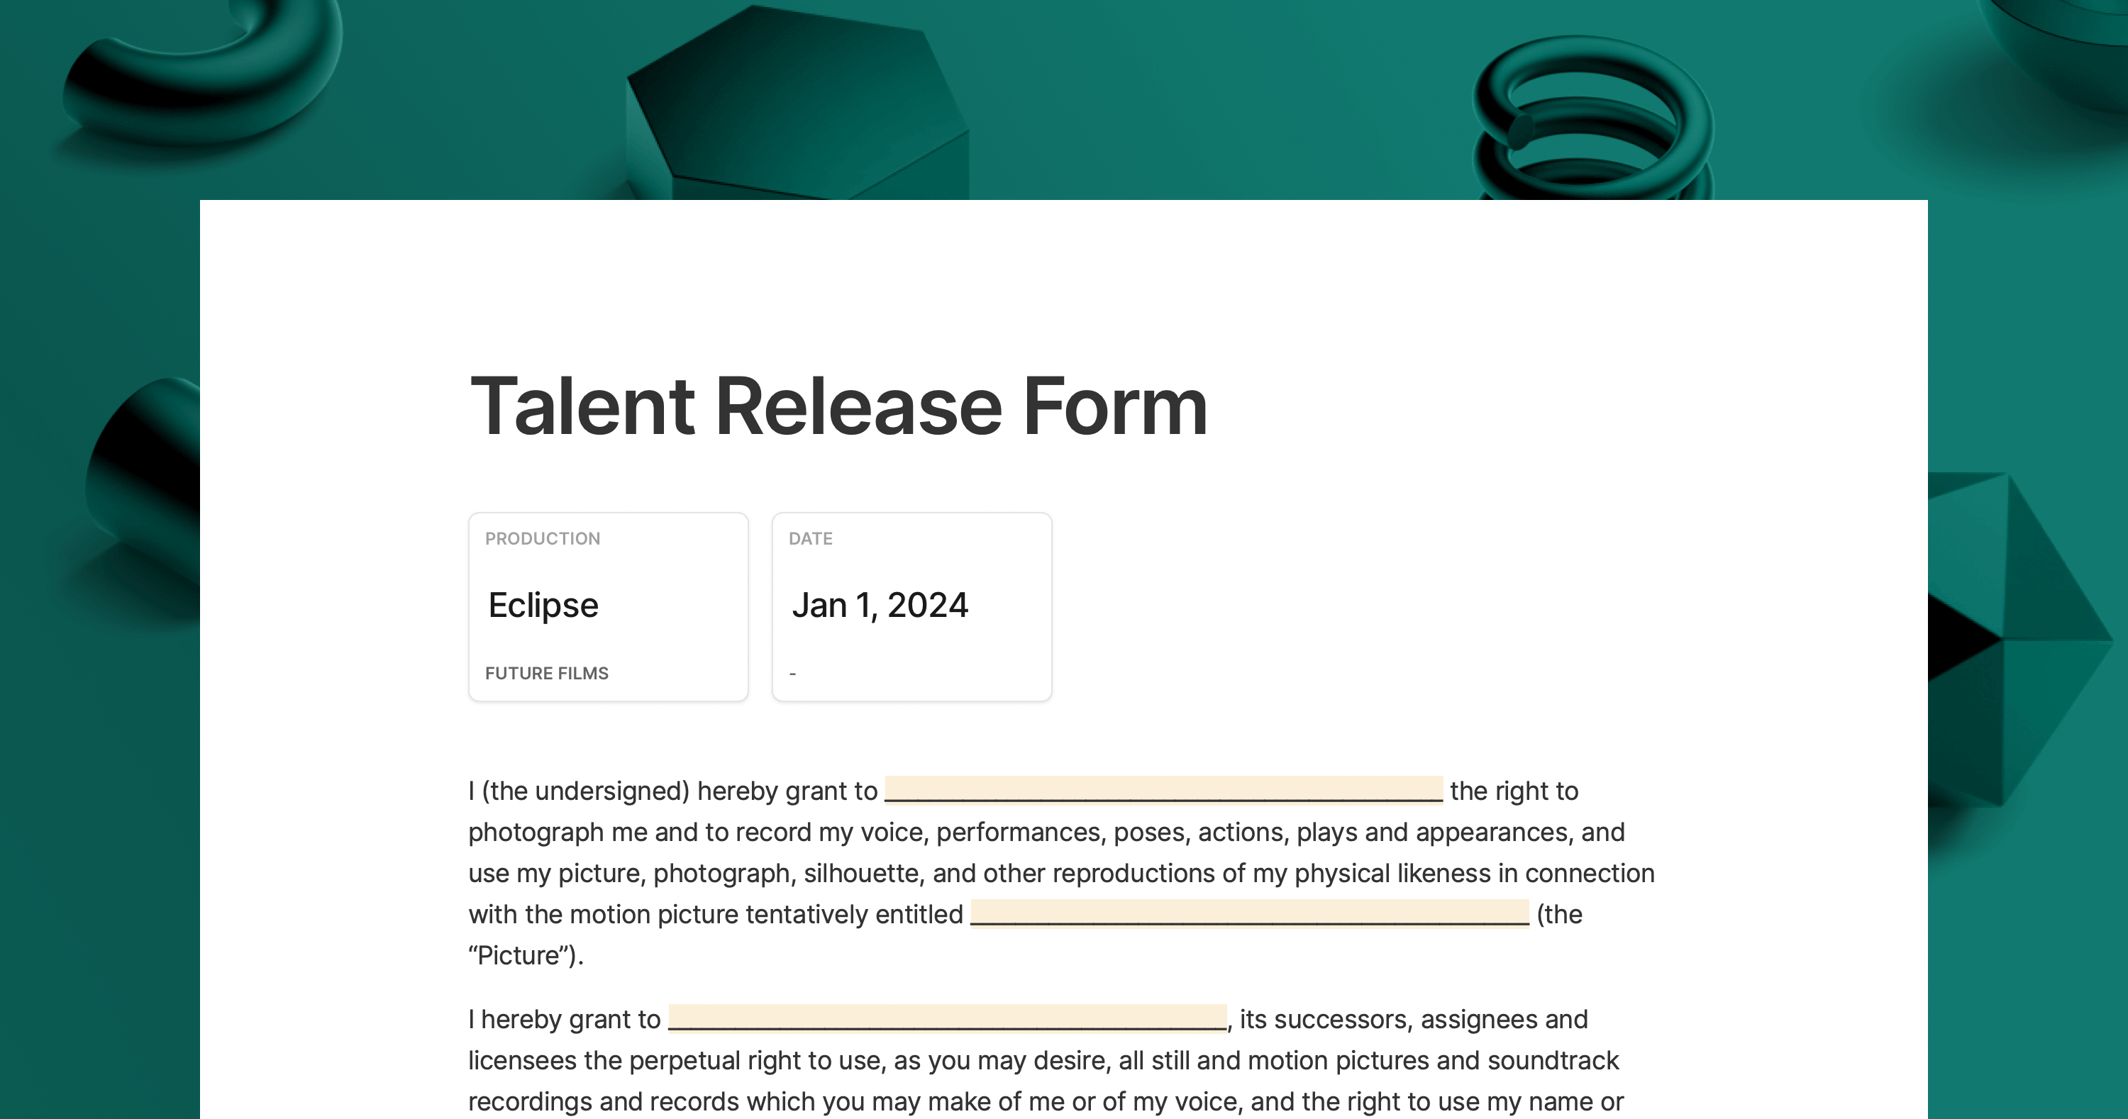 https://3389140.fs1.hubspotusercontent-na1.net/hubfs/3389140/talent%20release%20form%20cover.png